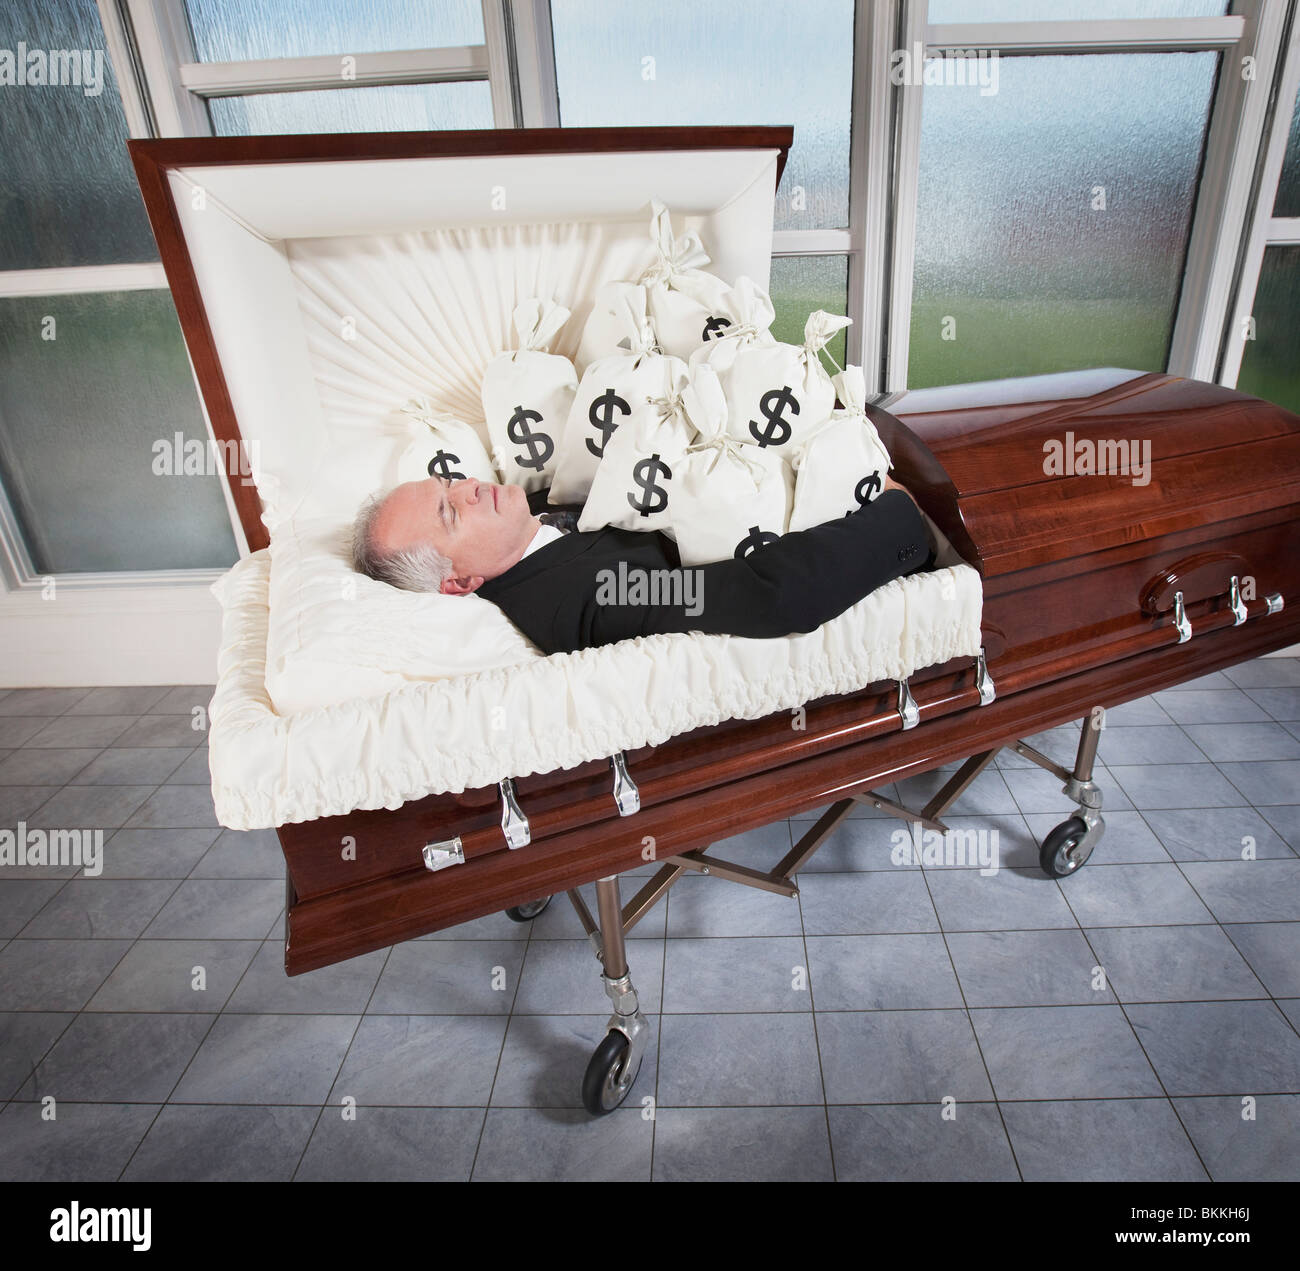 a-man-laying-in-a-coffin-surrounded-by-bags-of-money-BKKH6J.jpg